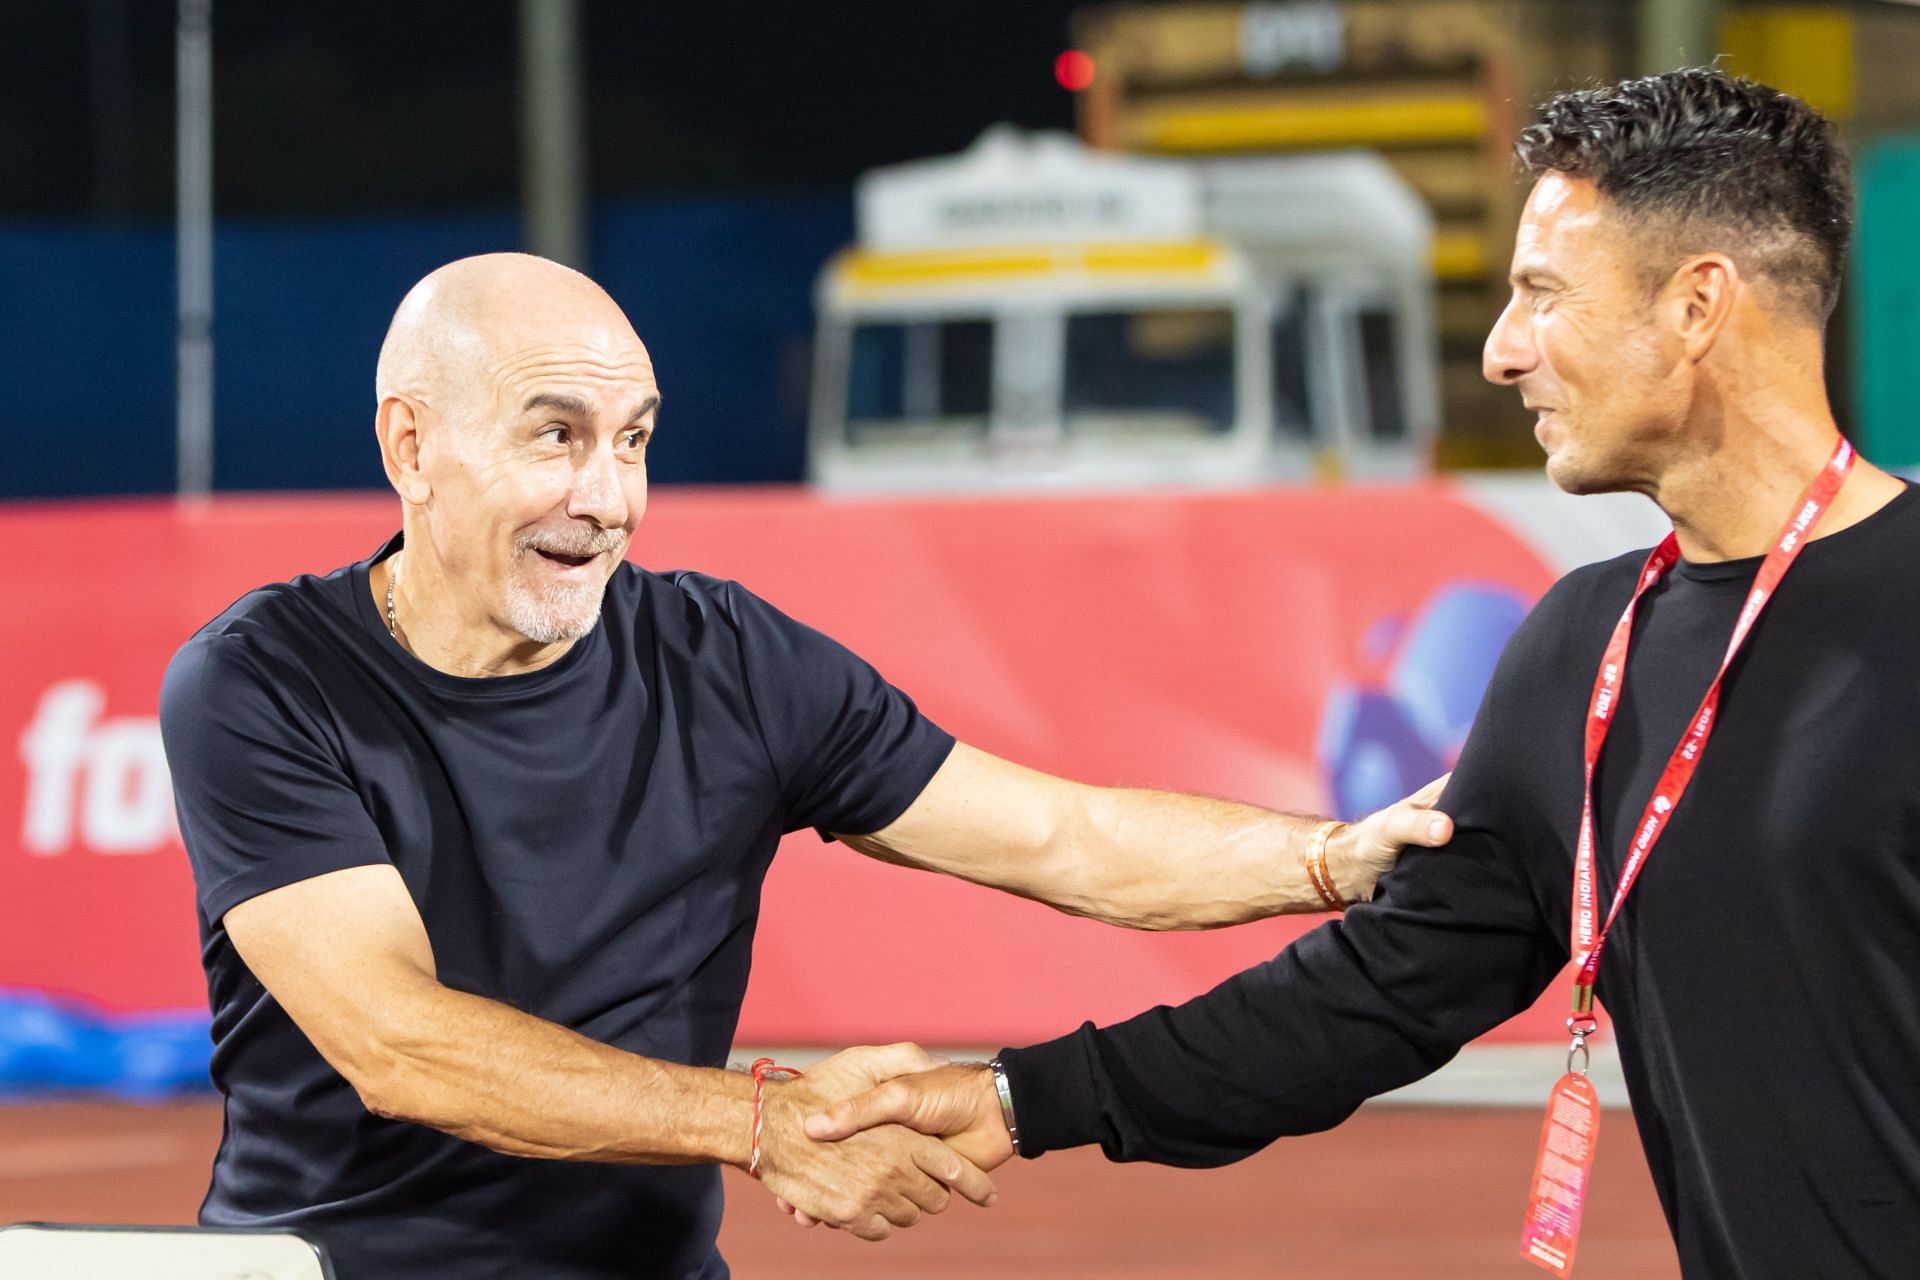 Antonio Lopez Habas and Marco Pezzaiuoli shaking hands after the game. (Image Courtesy: Twitter/IndSuperLeague)